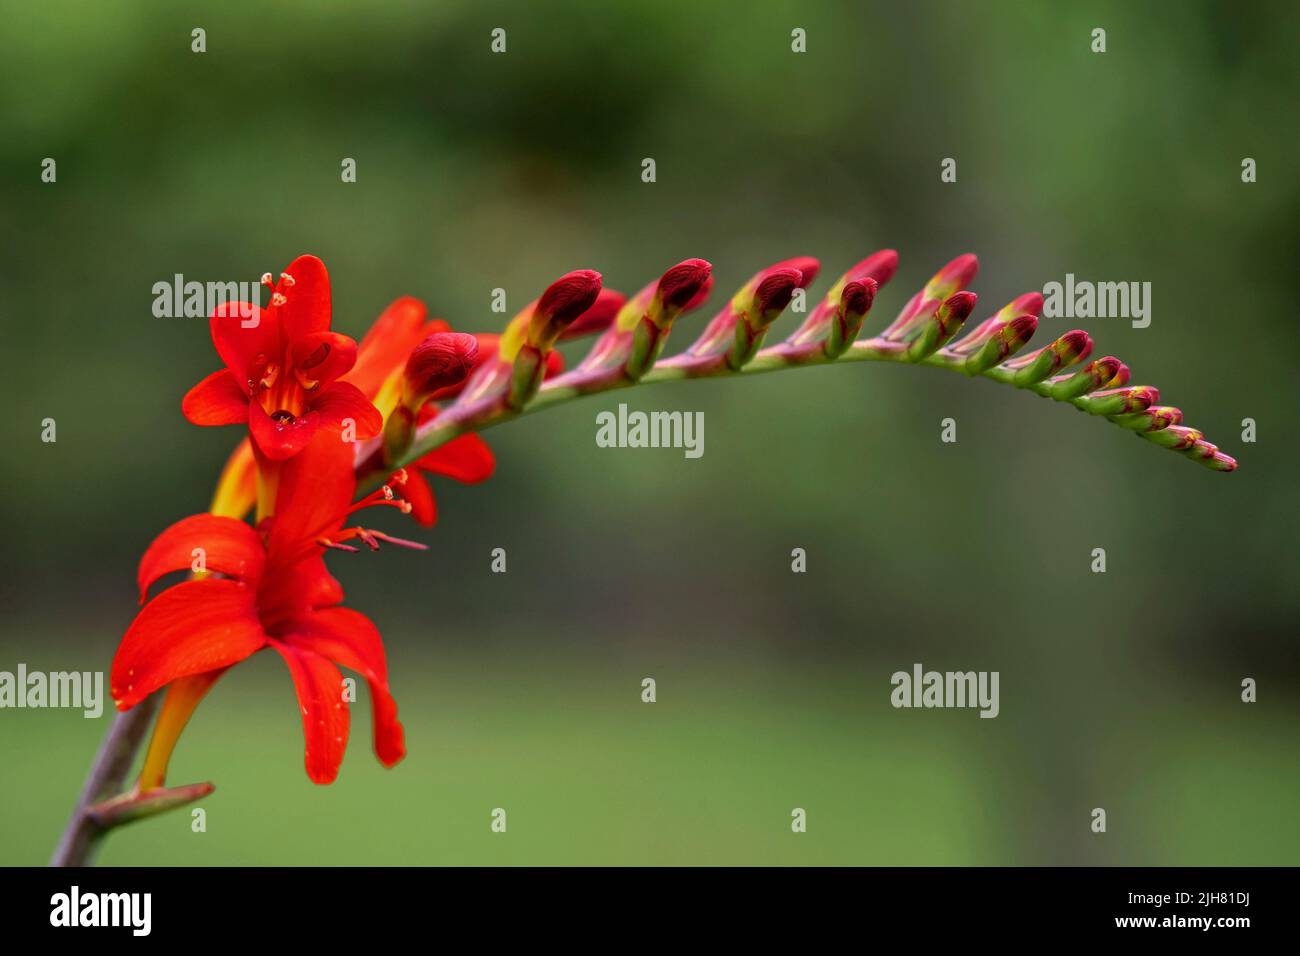 Crocosmia flower spike with open red flowers and buds Stock Photo